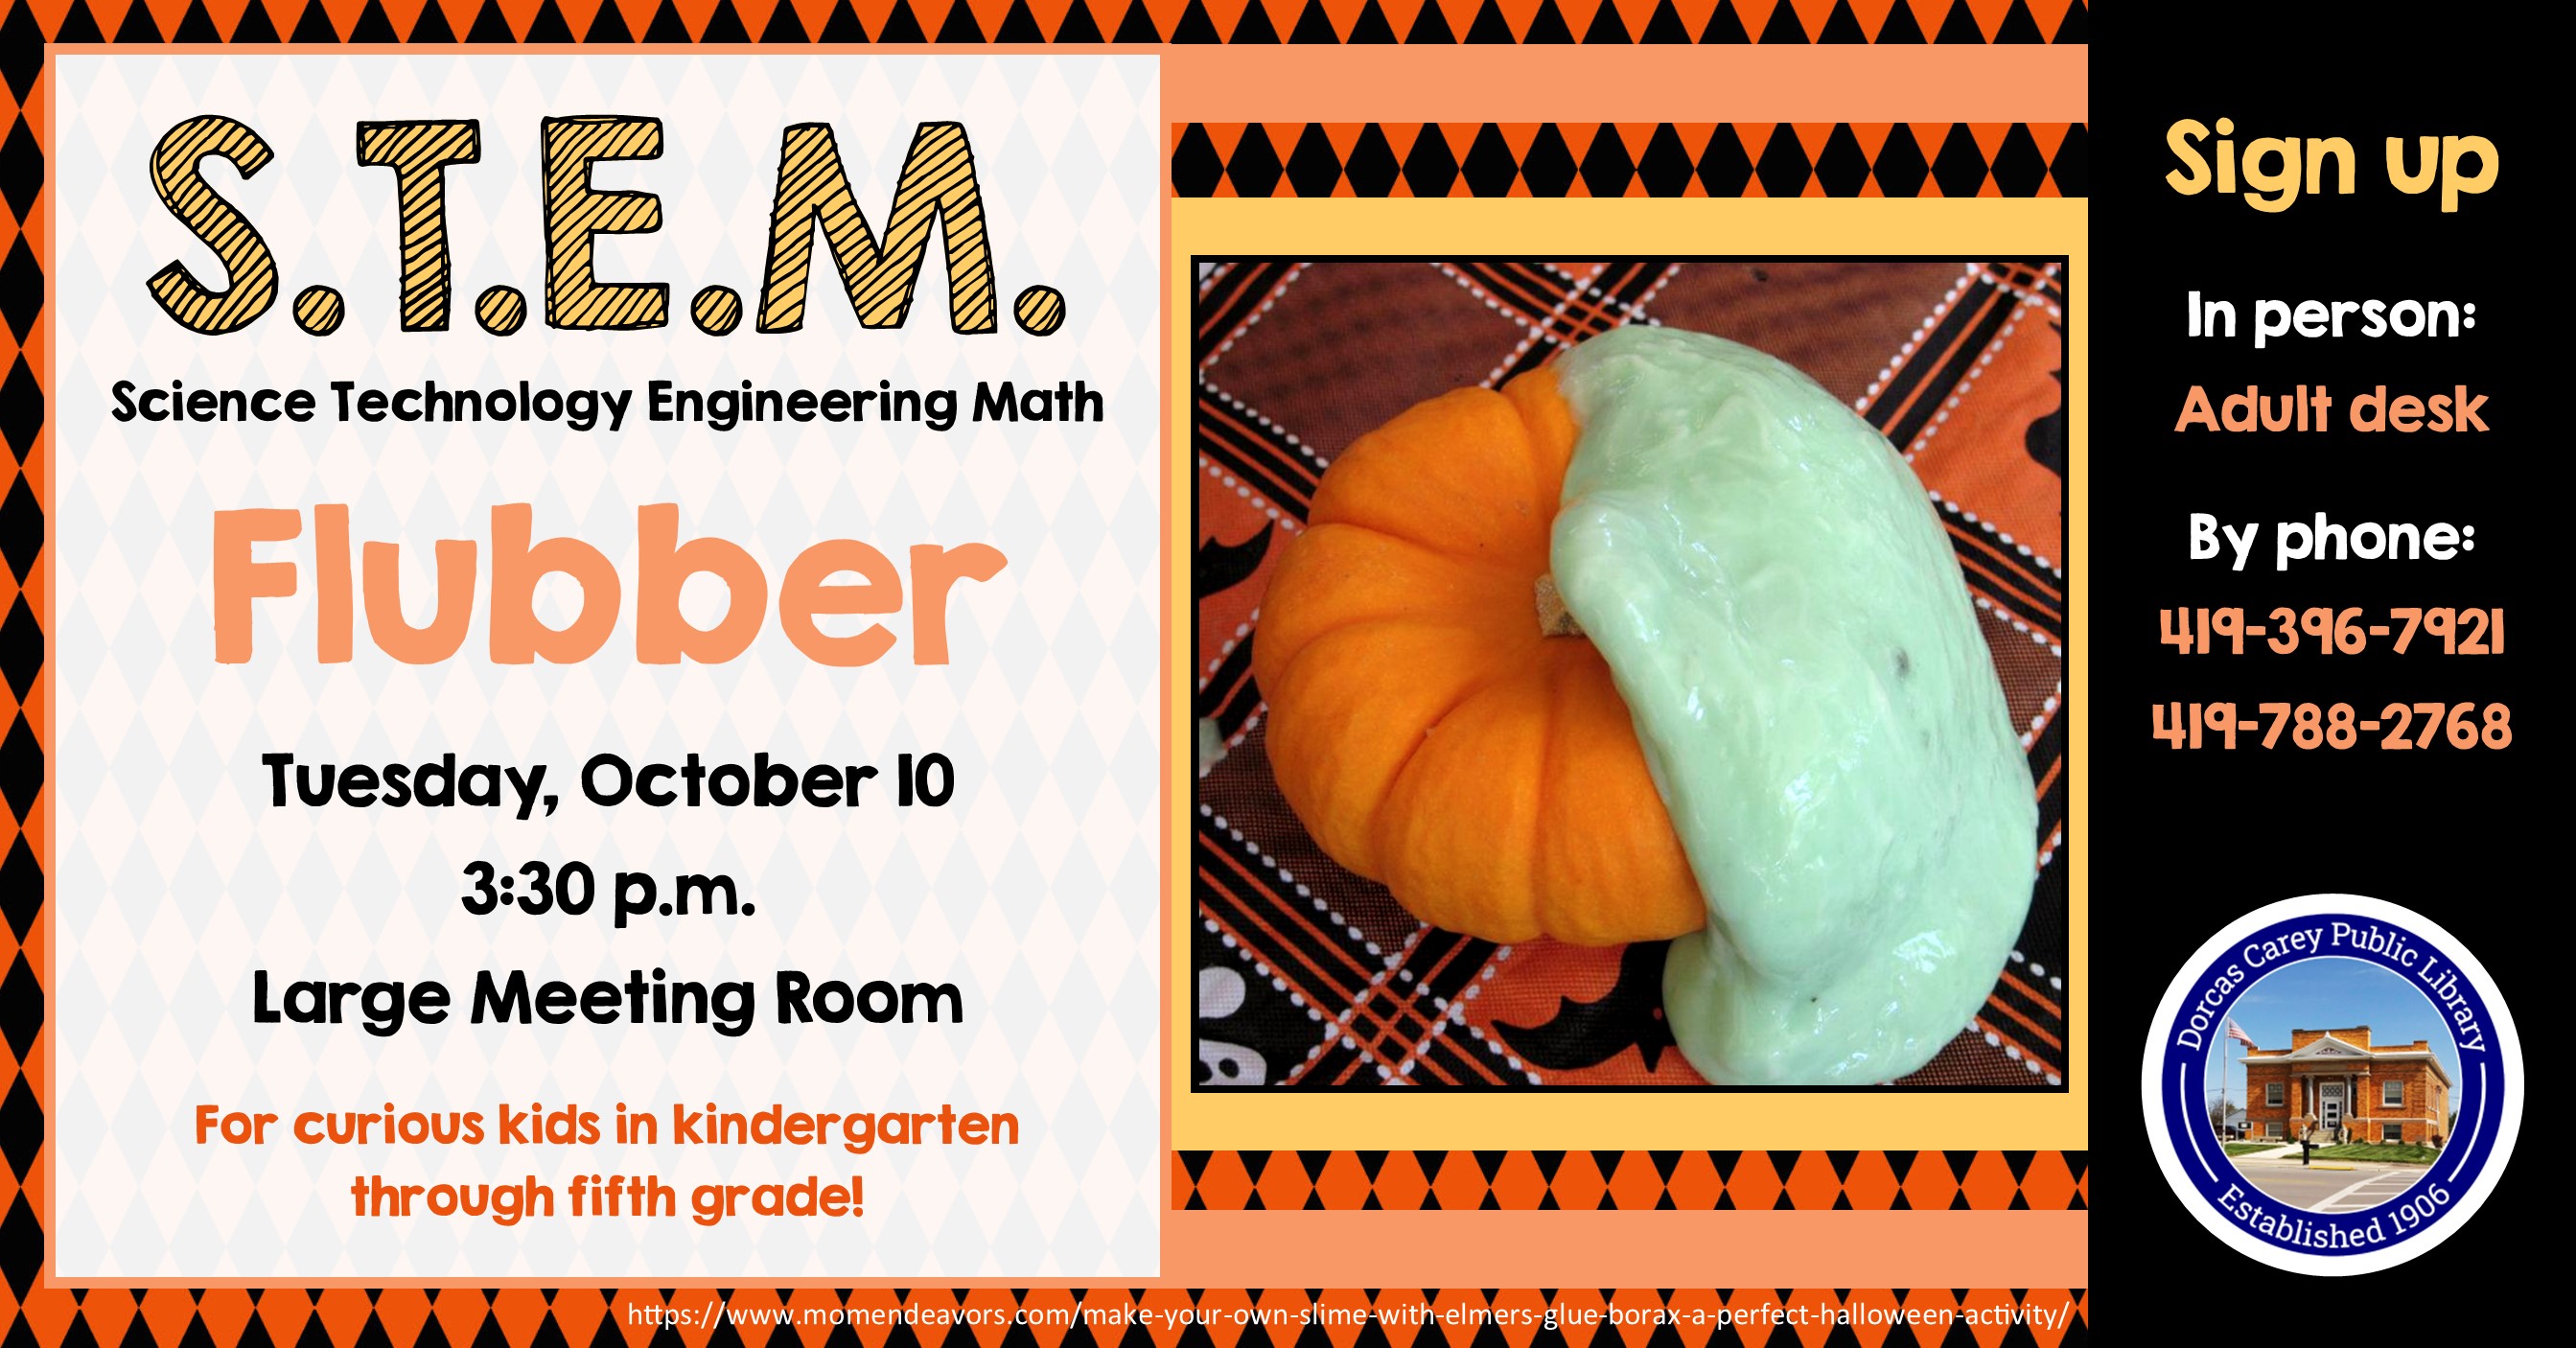 This program will be held on the second Tuesday of the month from September through May at 3:30 p.m.  Come enjoy the hands-on-experience of learning.  Children in grades Kindergarten through 5 are encouraged to join the learning fun!  This month’s project:  Flubber.  Please sign-up at the adult circulation desk or by phone at 419-396-7921 or 419-788-2768.